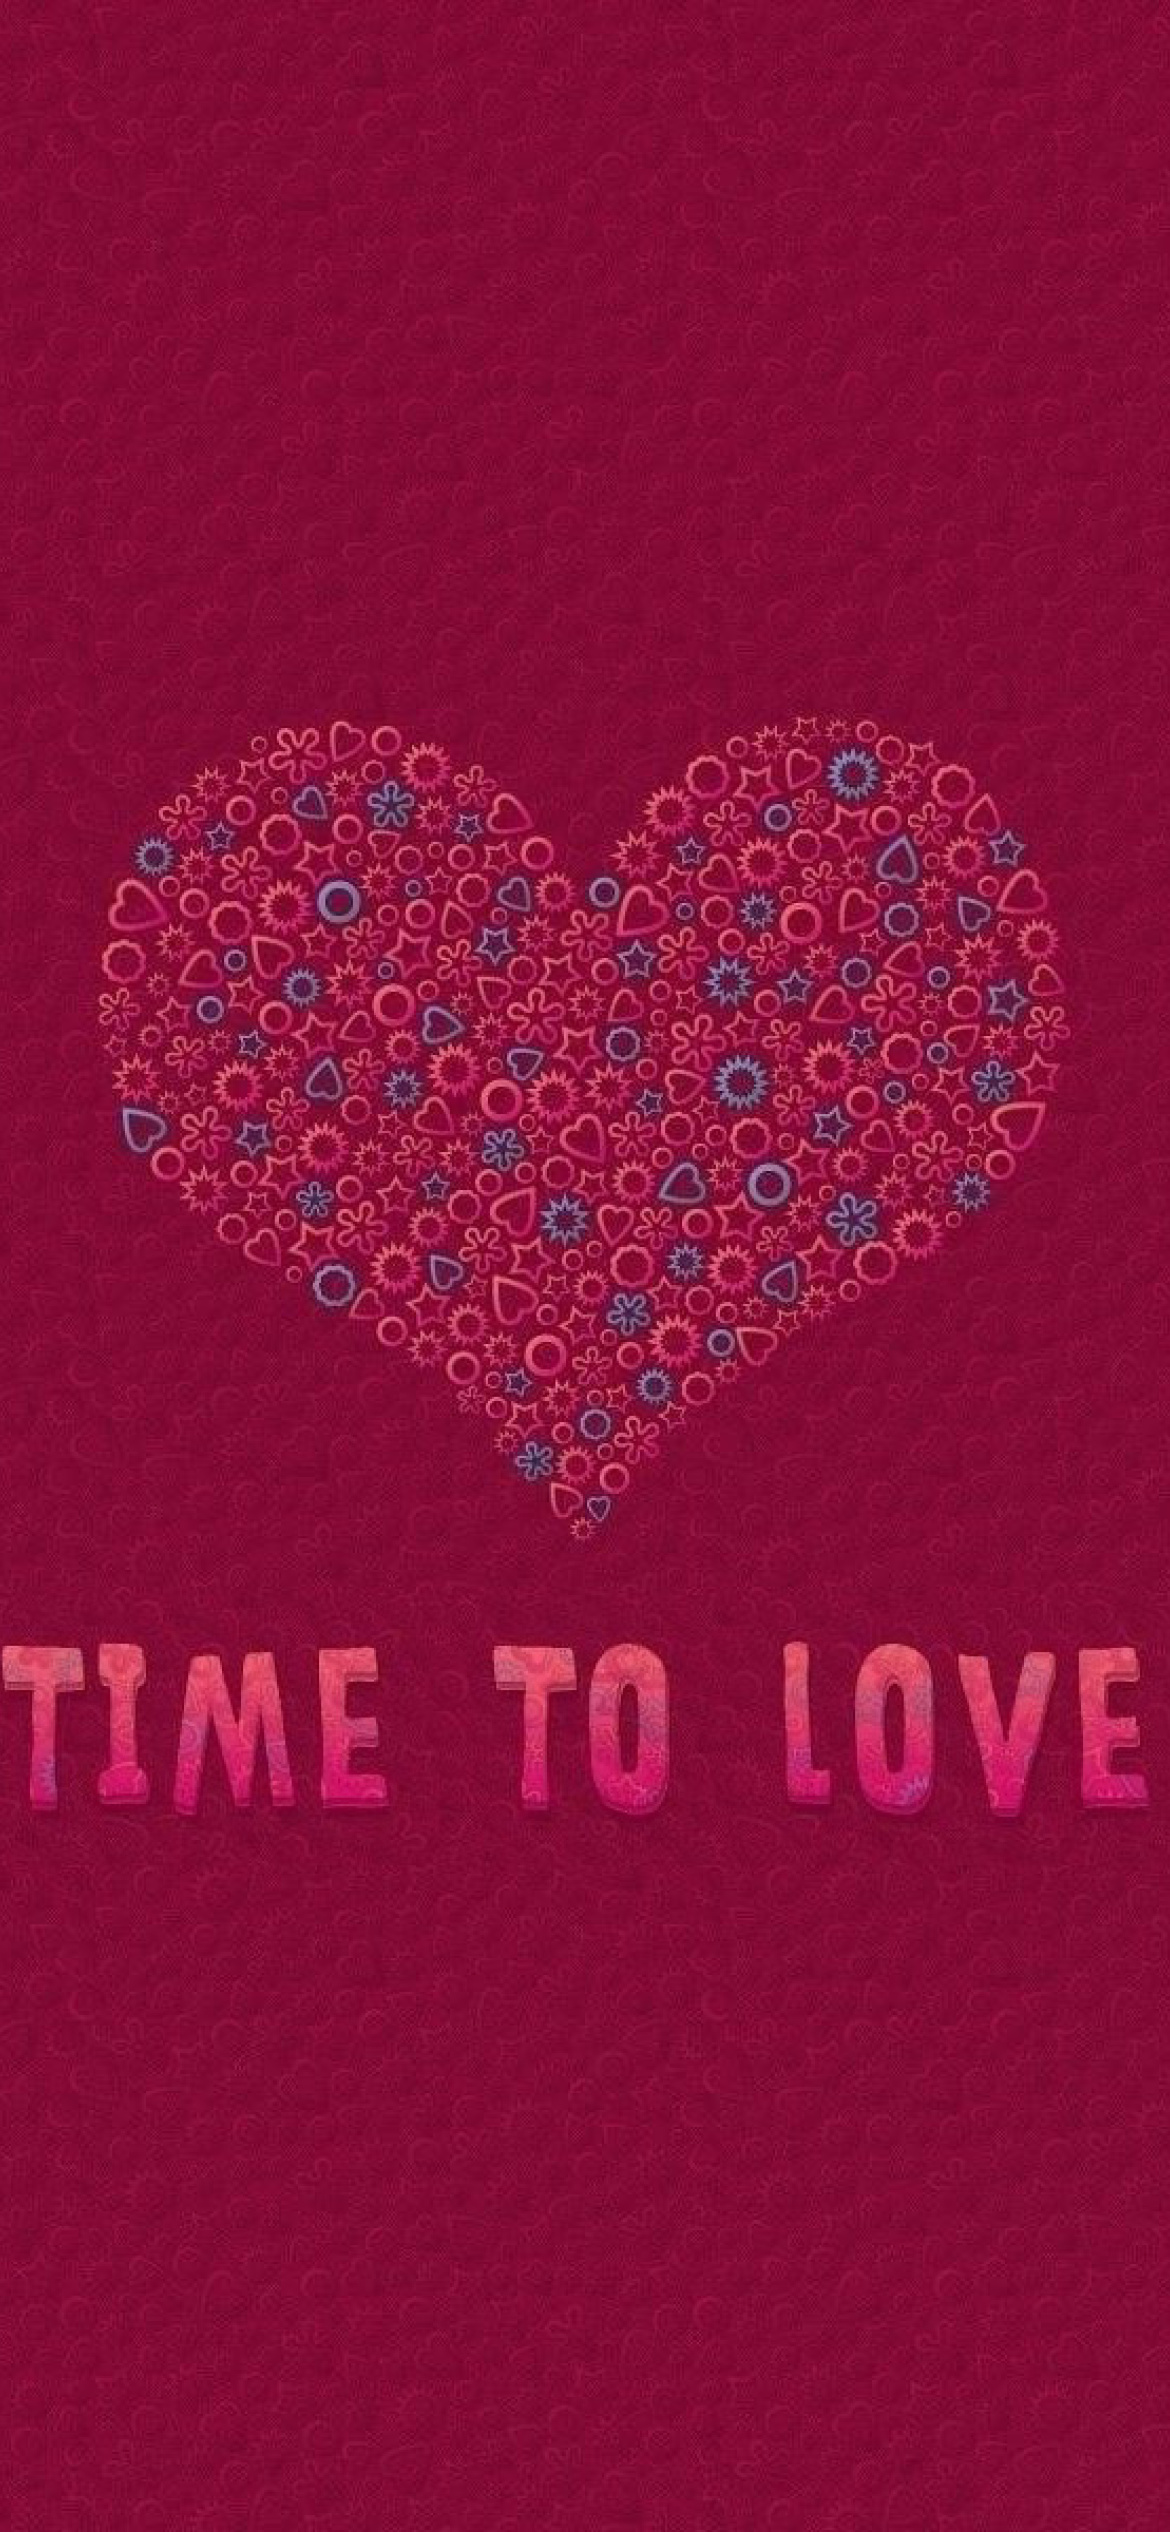 Time to Love wallpaper 1170x2532